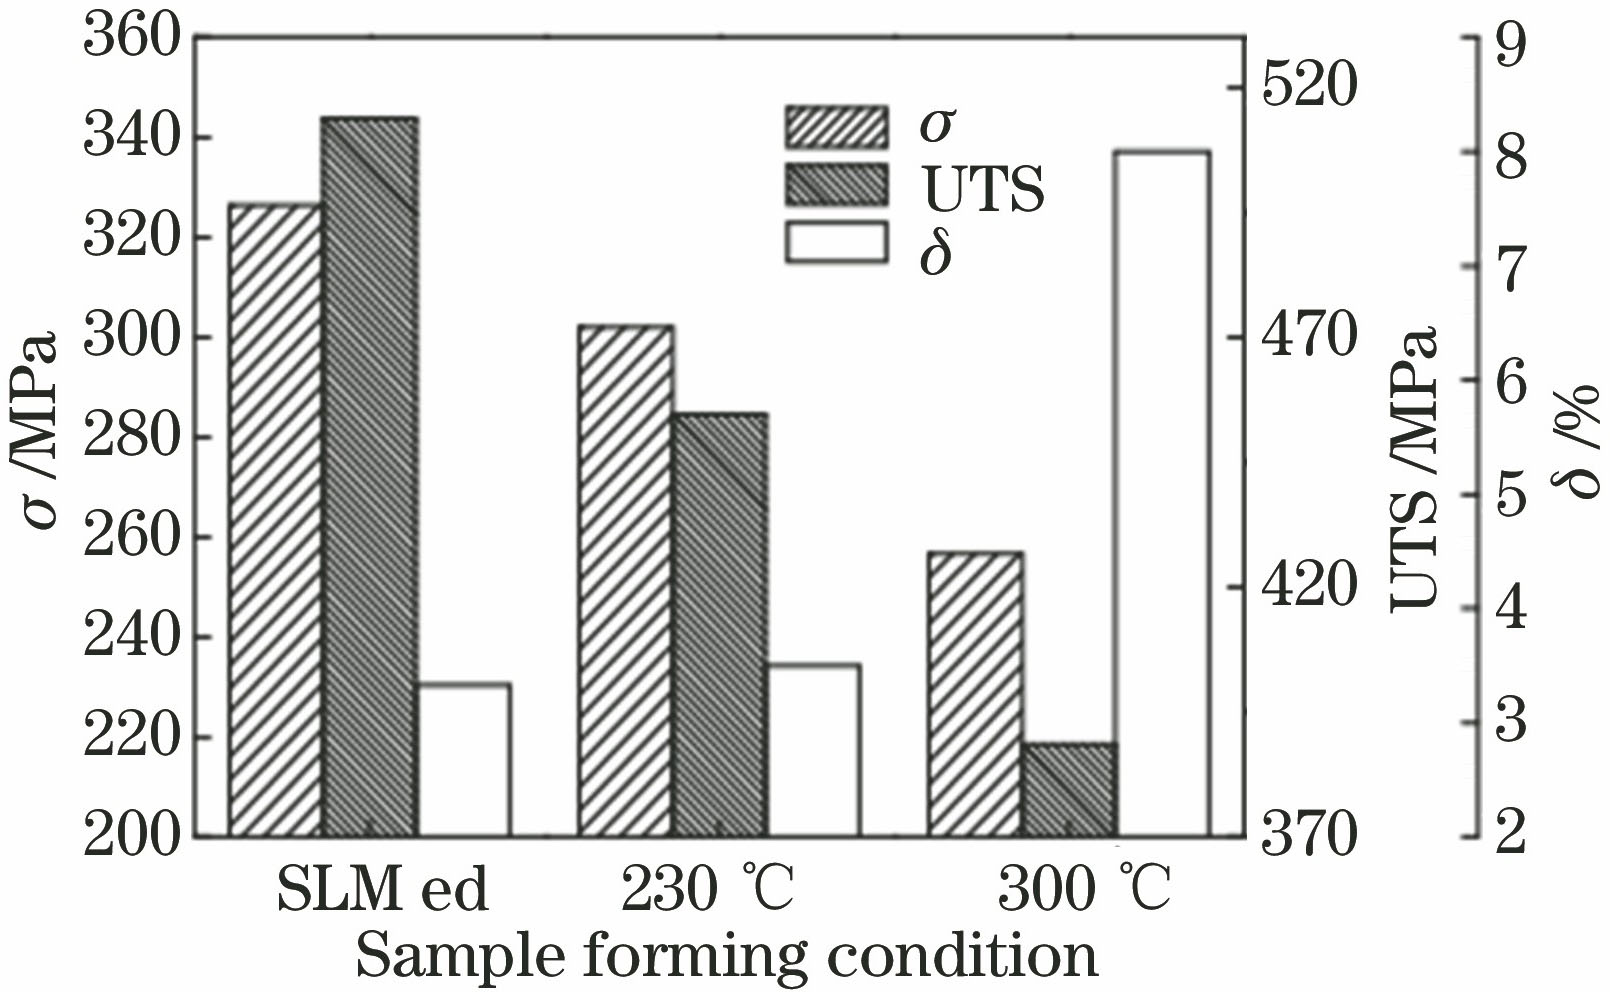 Mechanical properties of as-deposited and heat-treated AlSi10Mg specimens at room temperature [37]